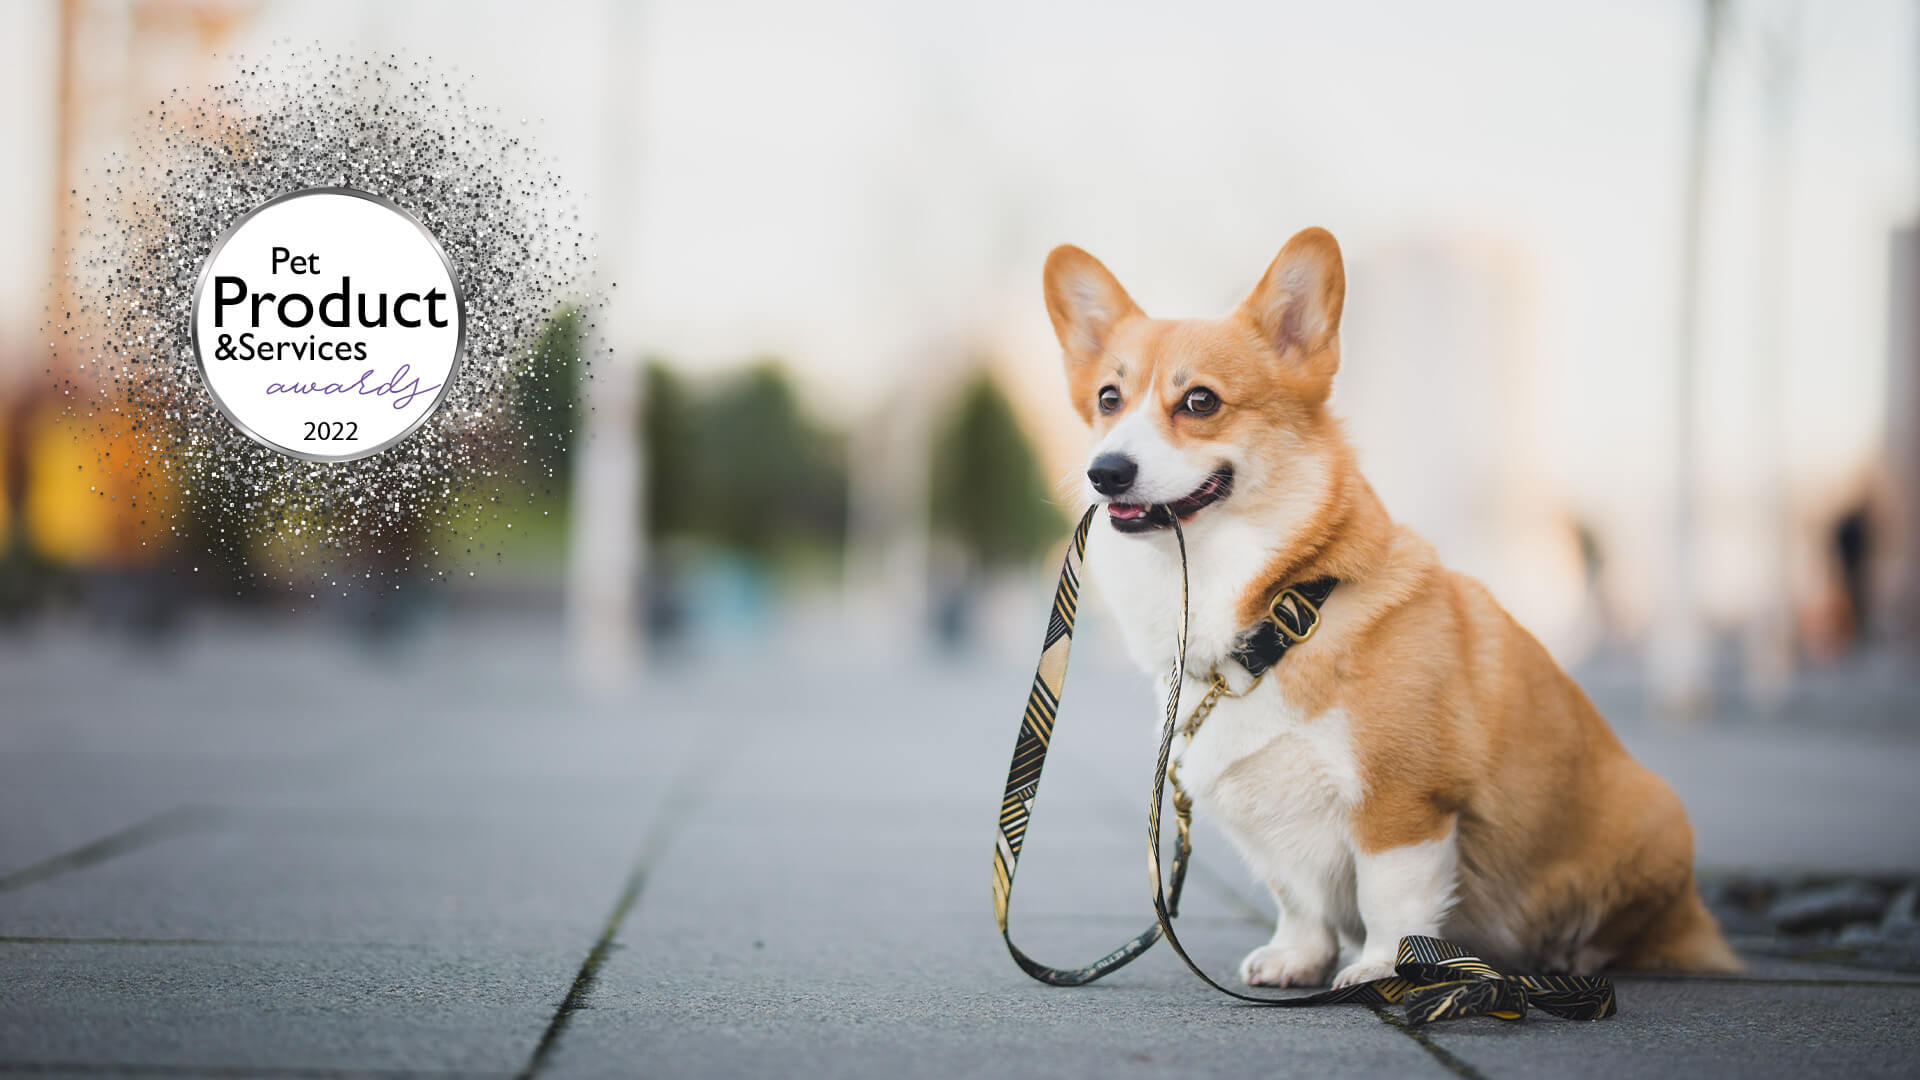 Corgi with a leash in his mouth. The LUXLife 2022 Pet Product and Services Awards logo is in the top left corner